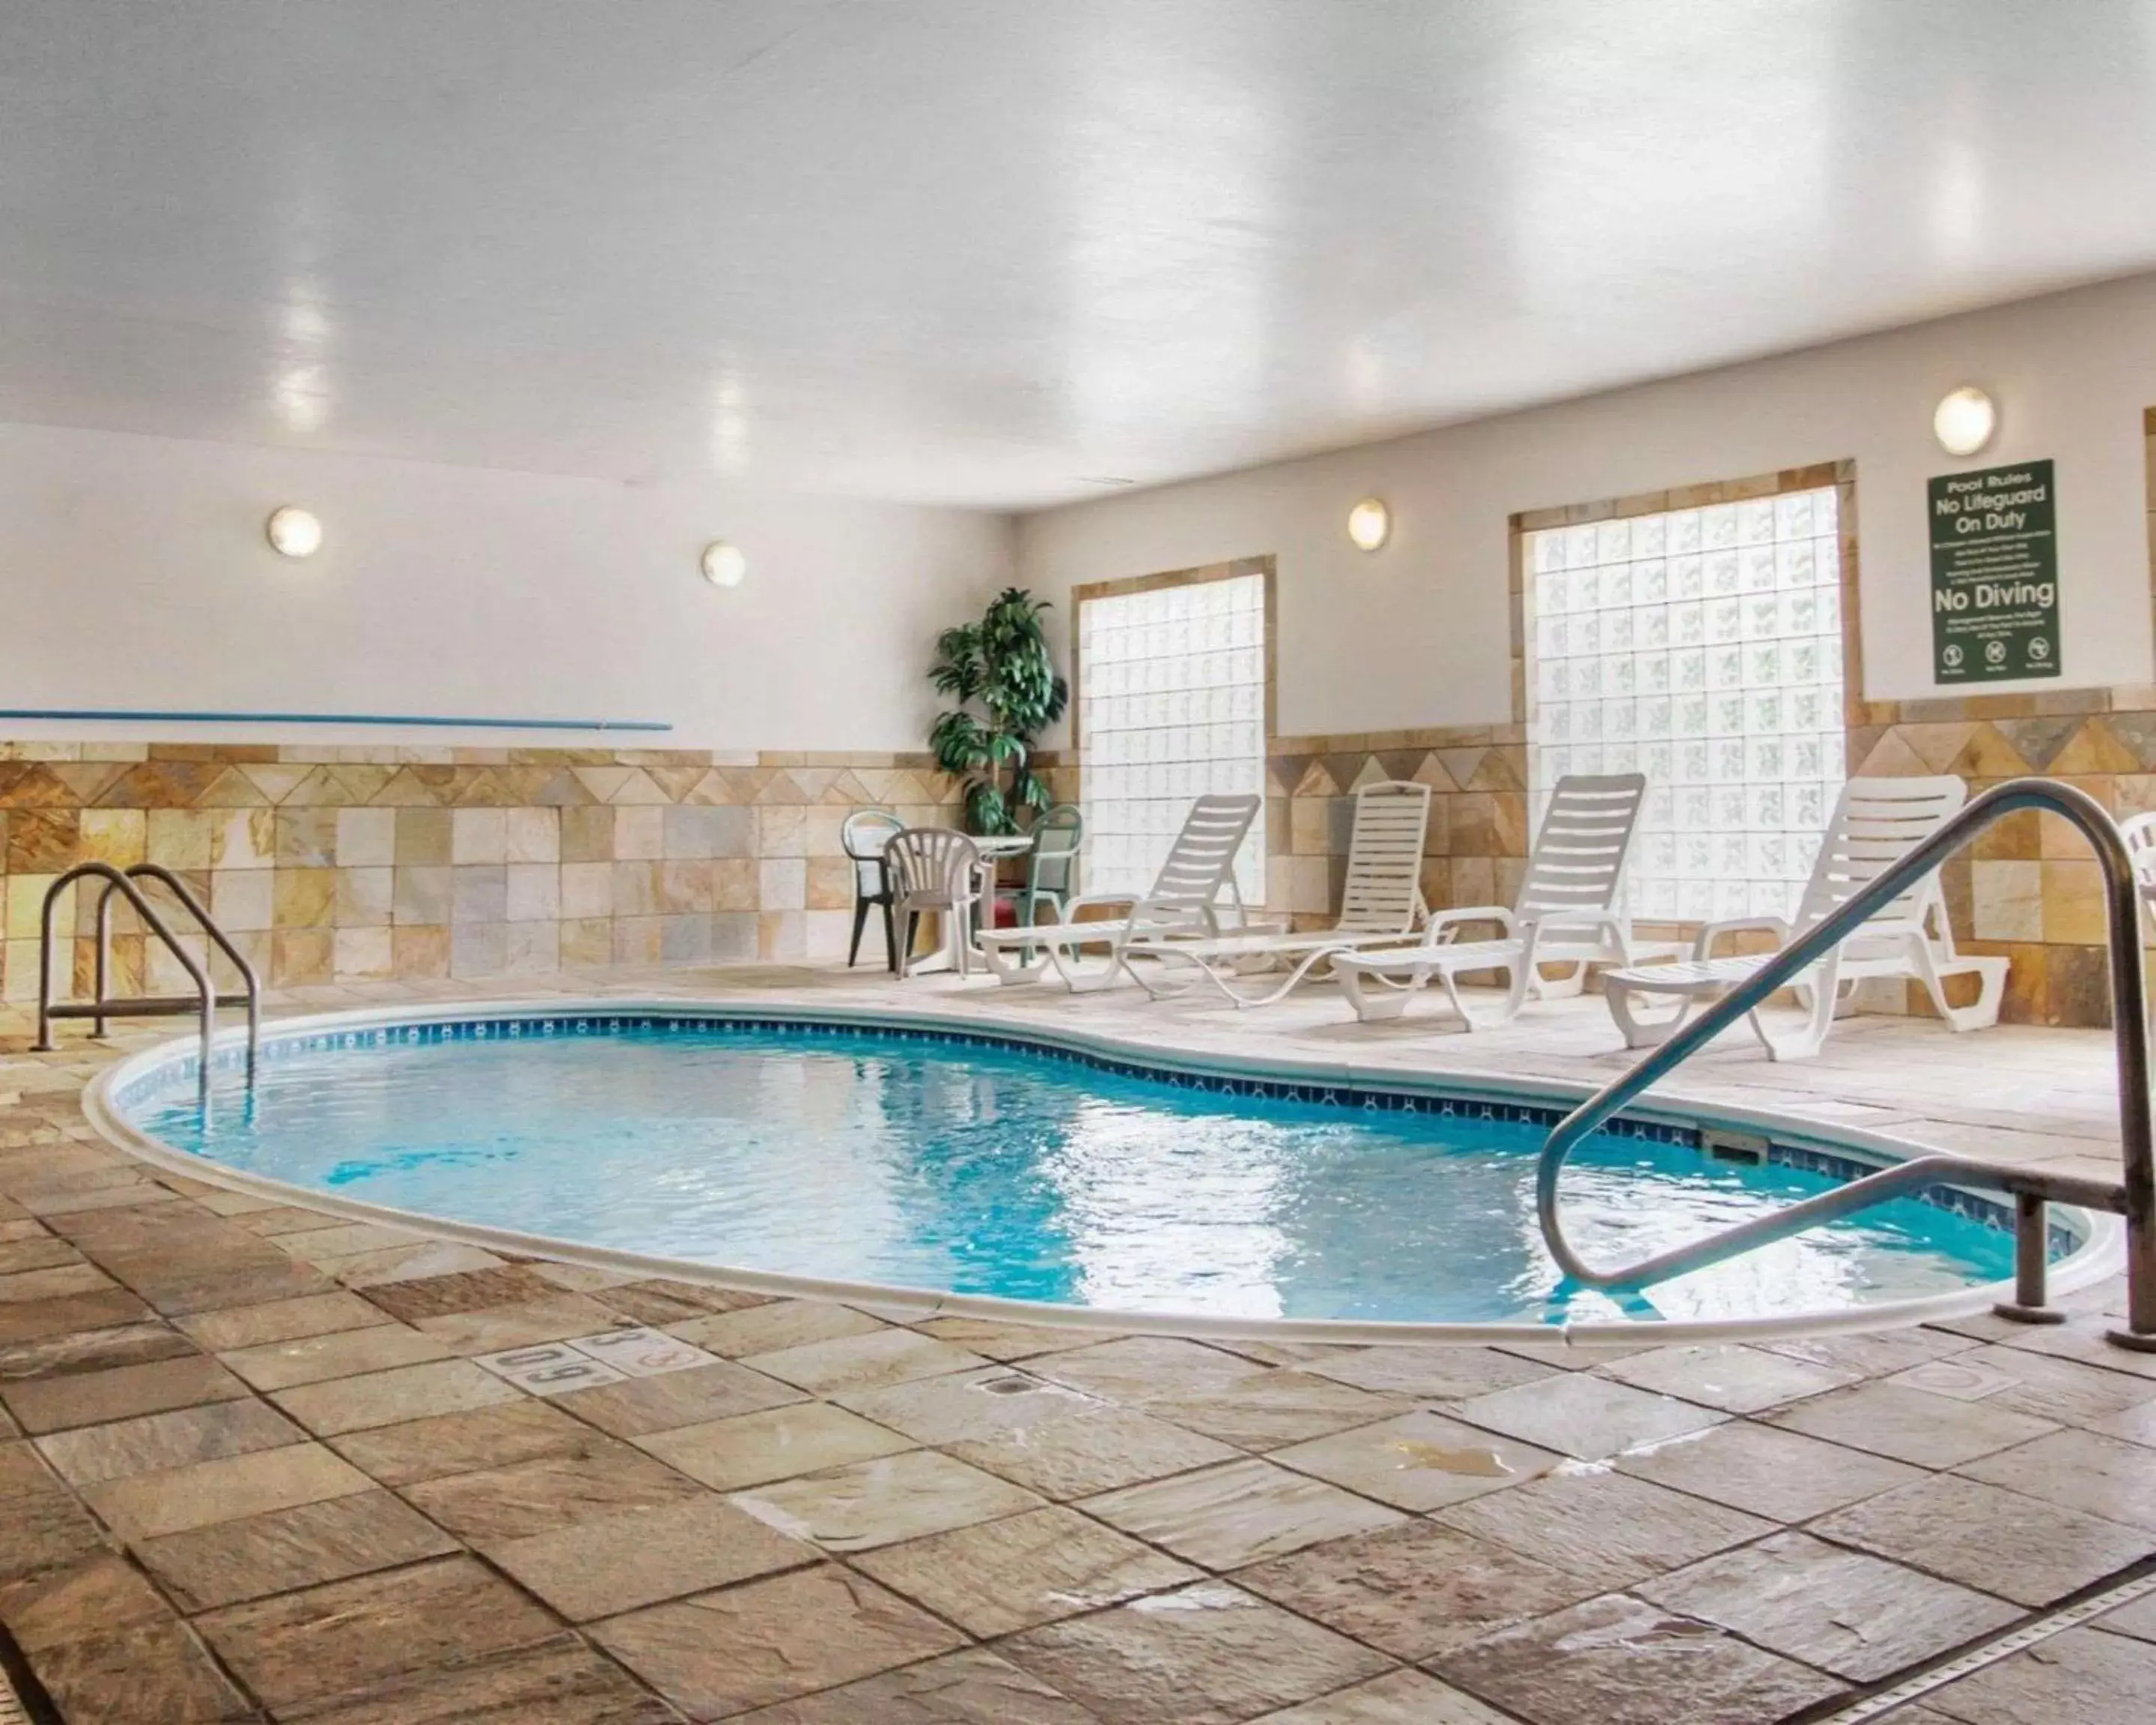 On site, Swimming Pool in Comfort Inn & Suites Hotel in the Black Hills